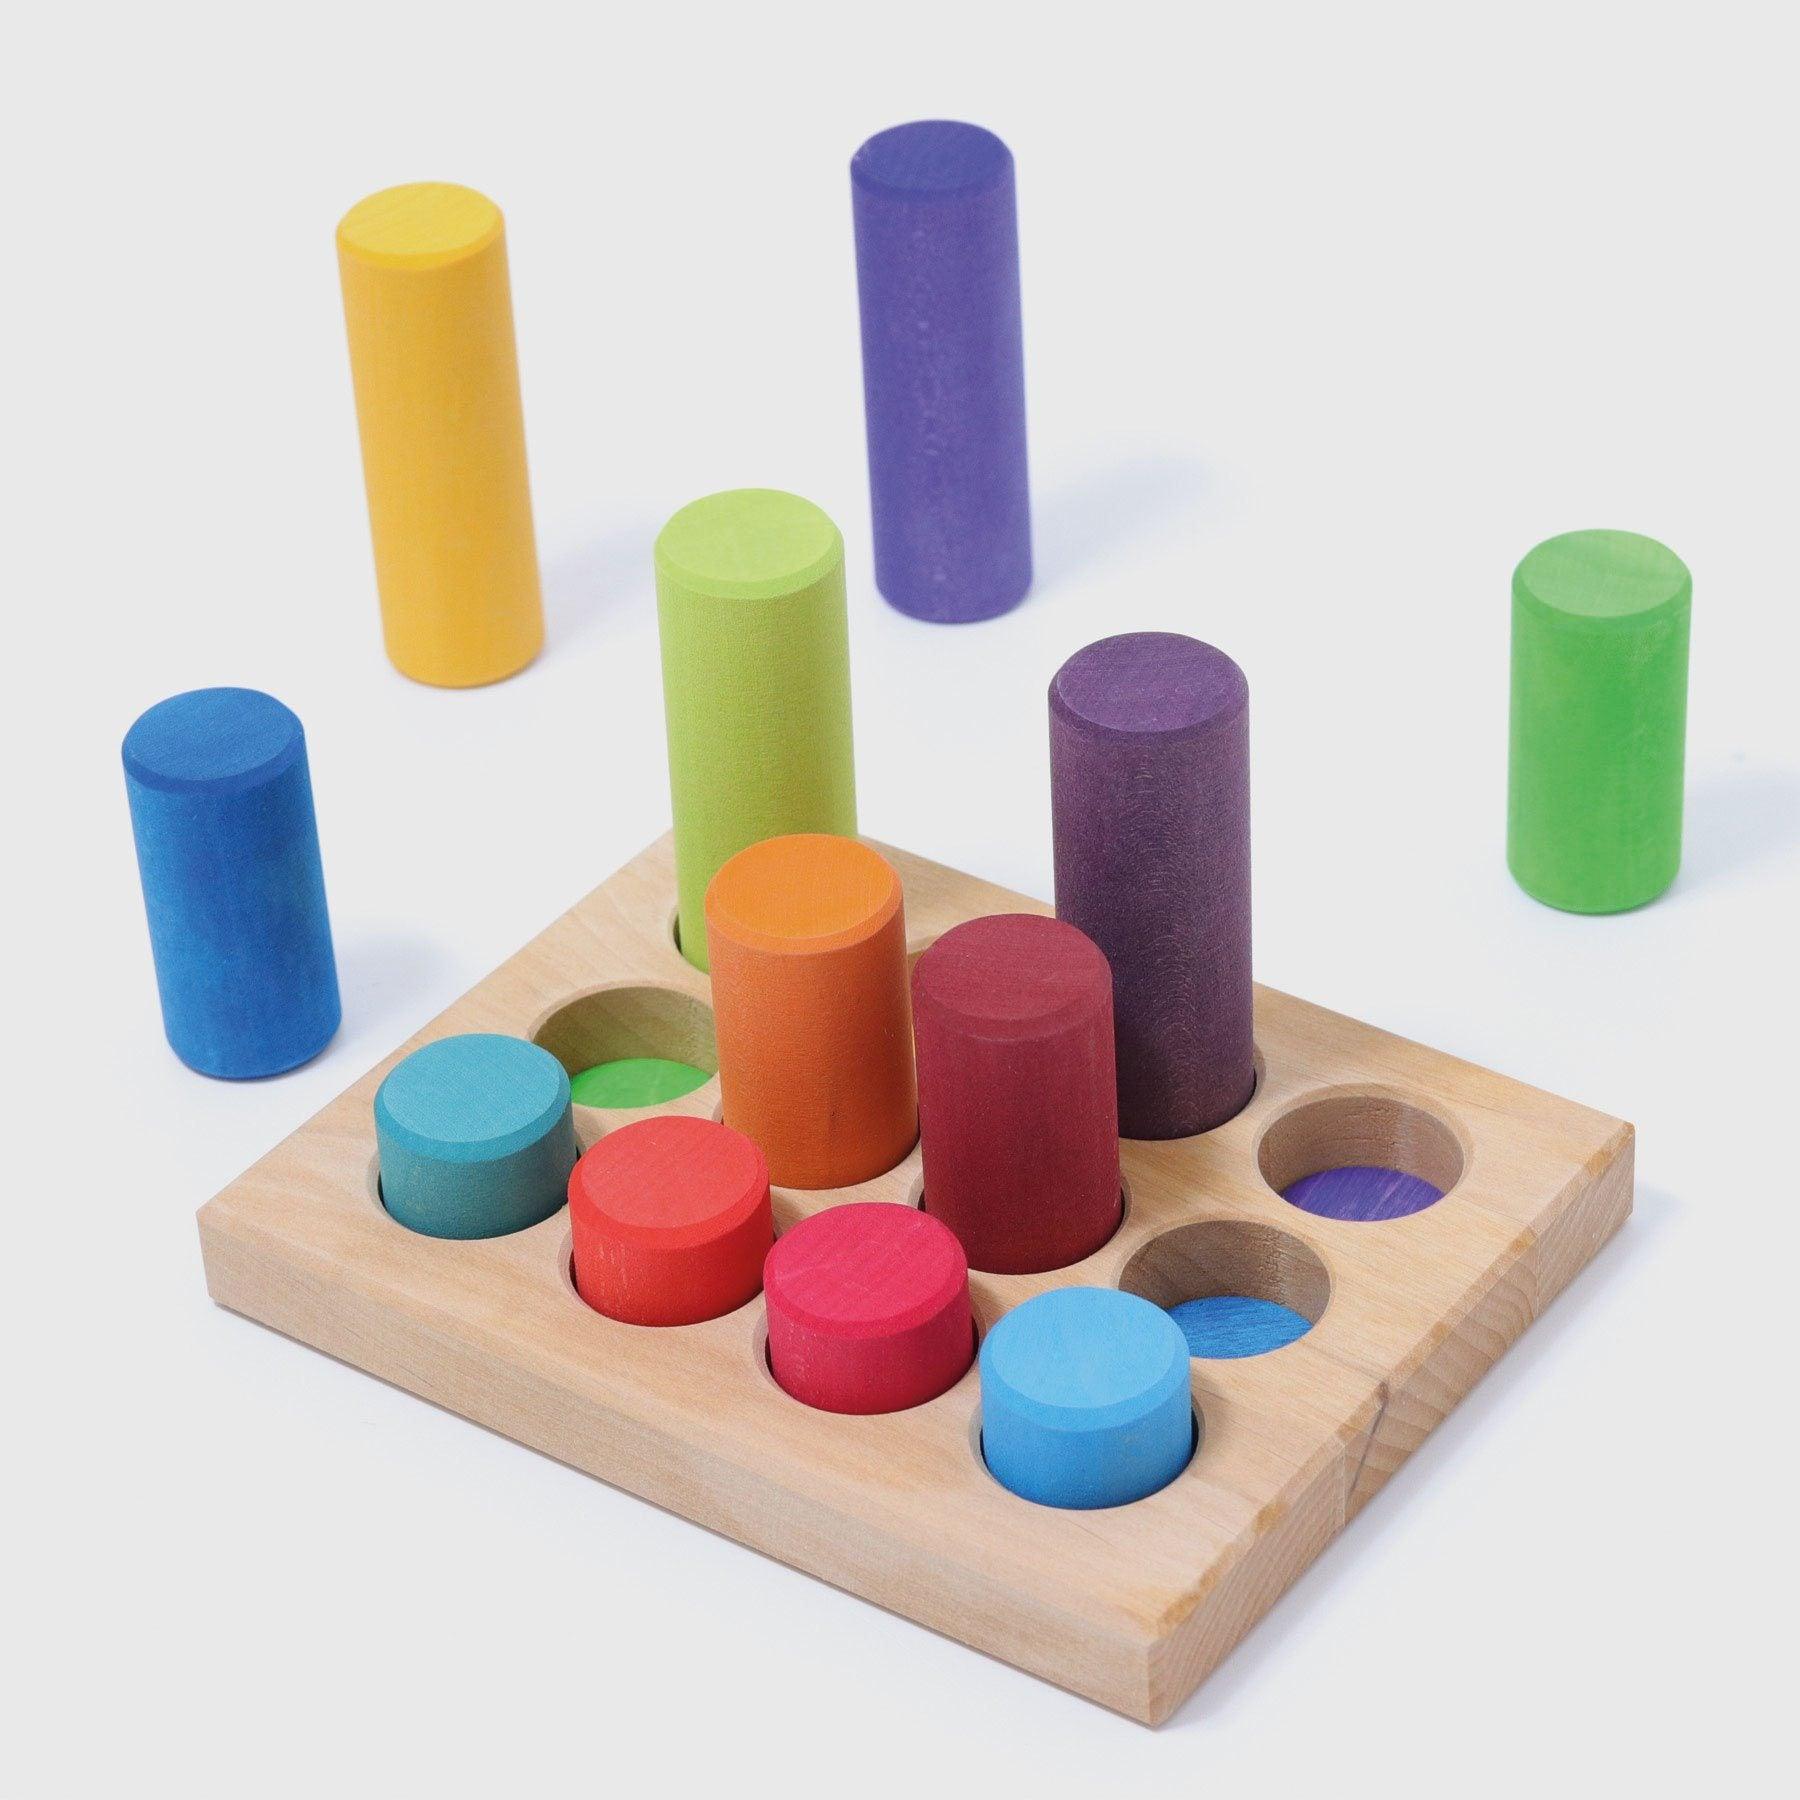 Grimm's Small Rainbow Rollers Stacking Game - Why and Whale